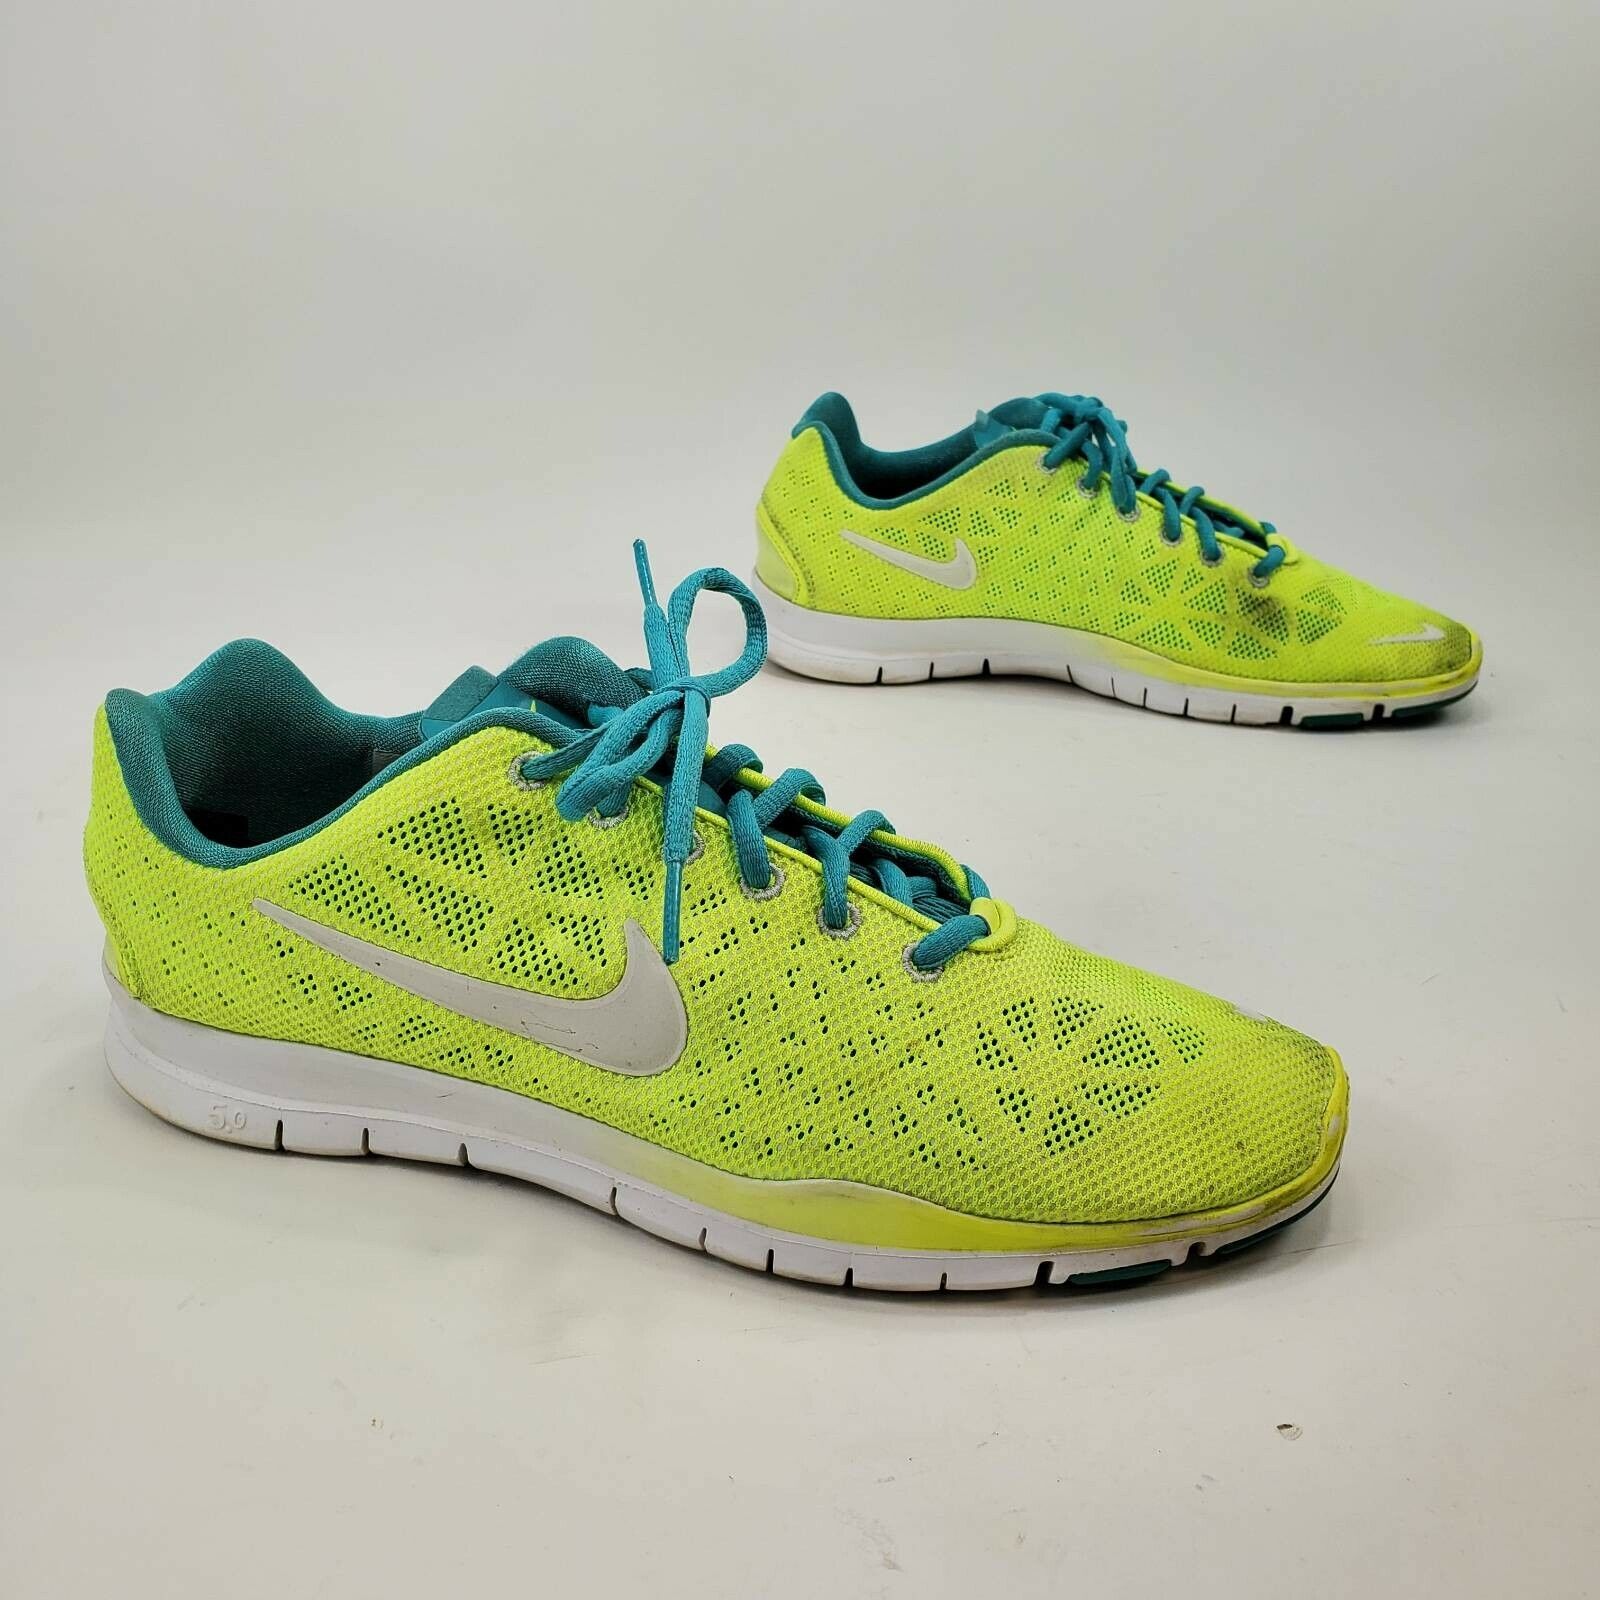 Nike Womens Free Tr Fit 3 Running Shoes Green 579968-700 Lace Up Mesh 9.5 M eBay